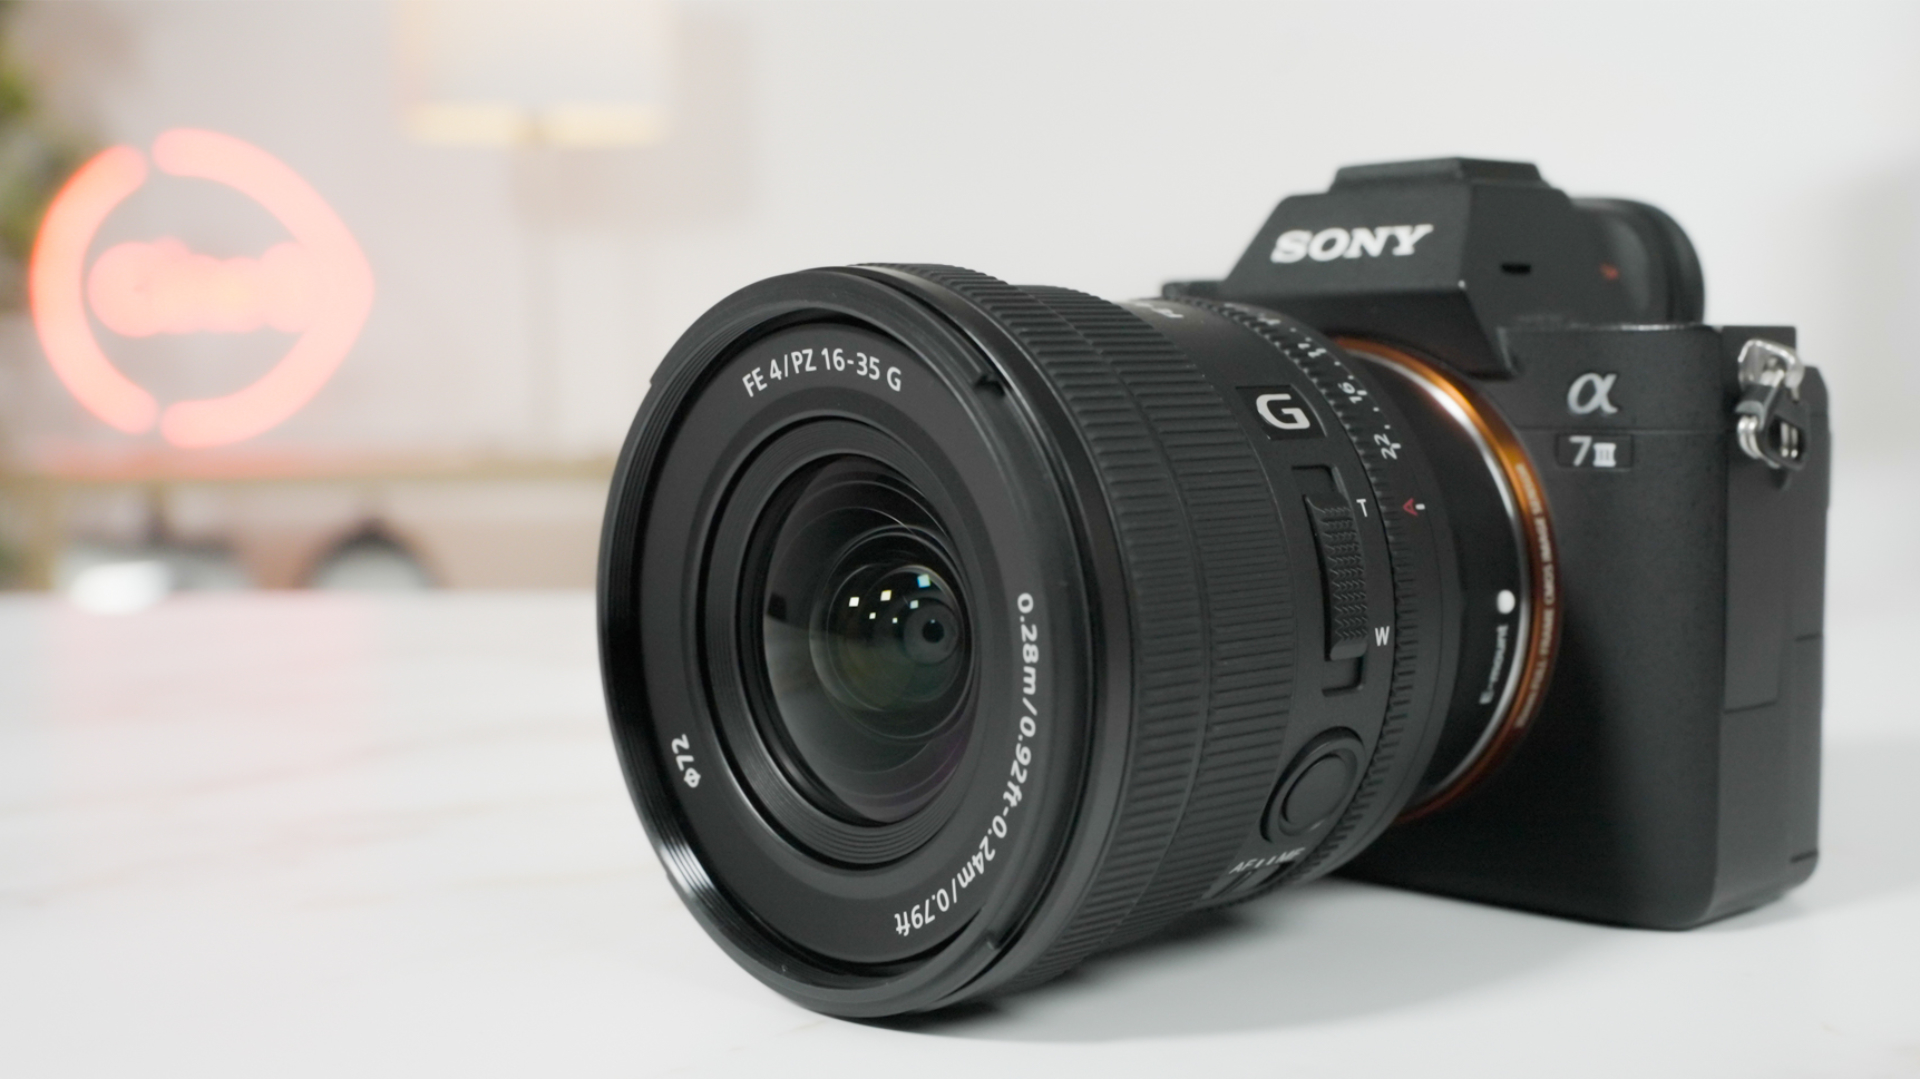 Sony FE PZ 16-35 f/4 G Zoom Lens Announced – with Electronic Zoom